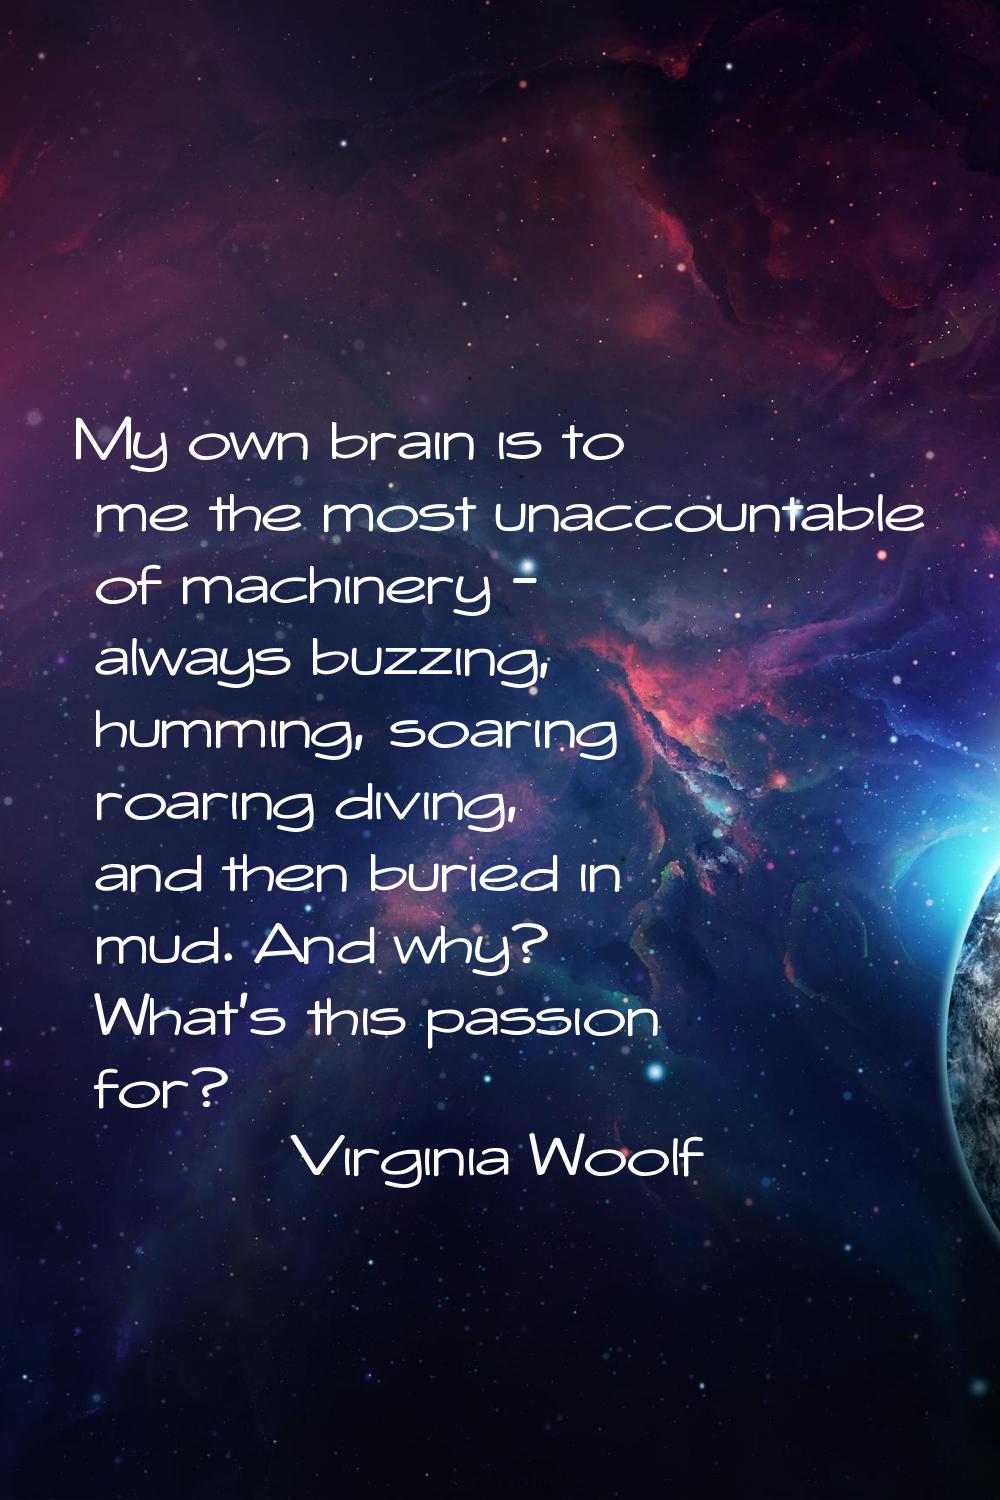 My own brain is to me the most unaccountable of machinery - always buzzing, humming, soaring roarin